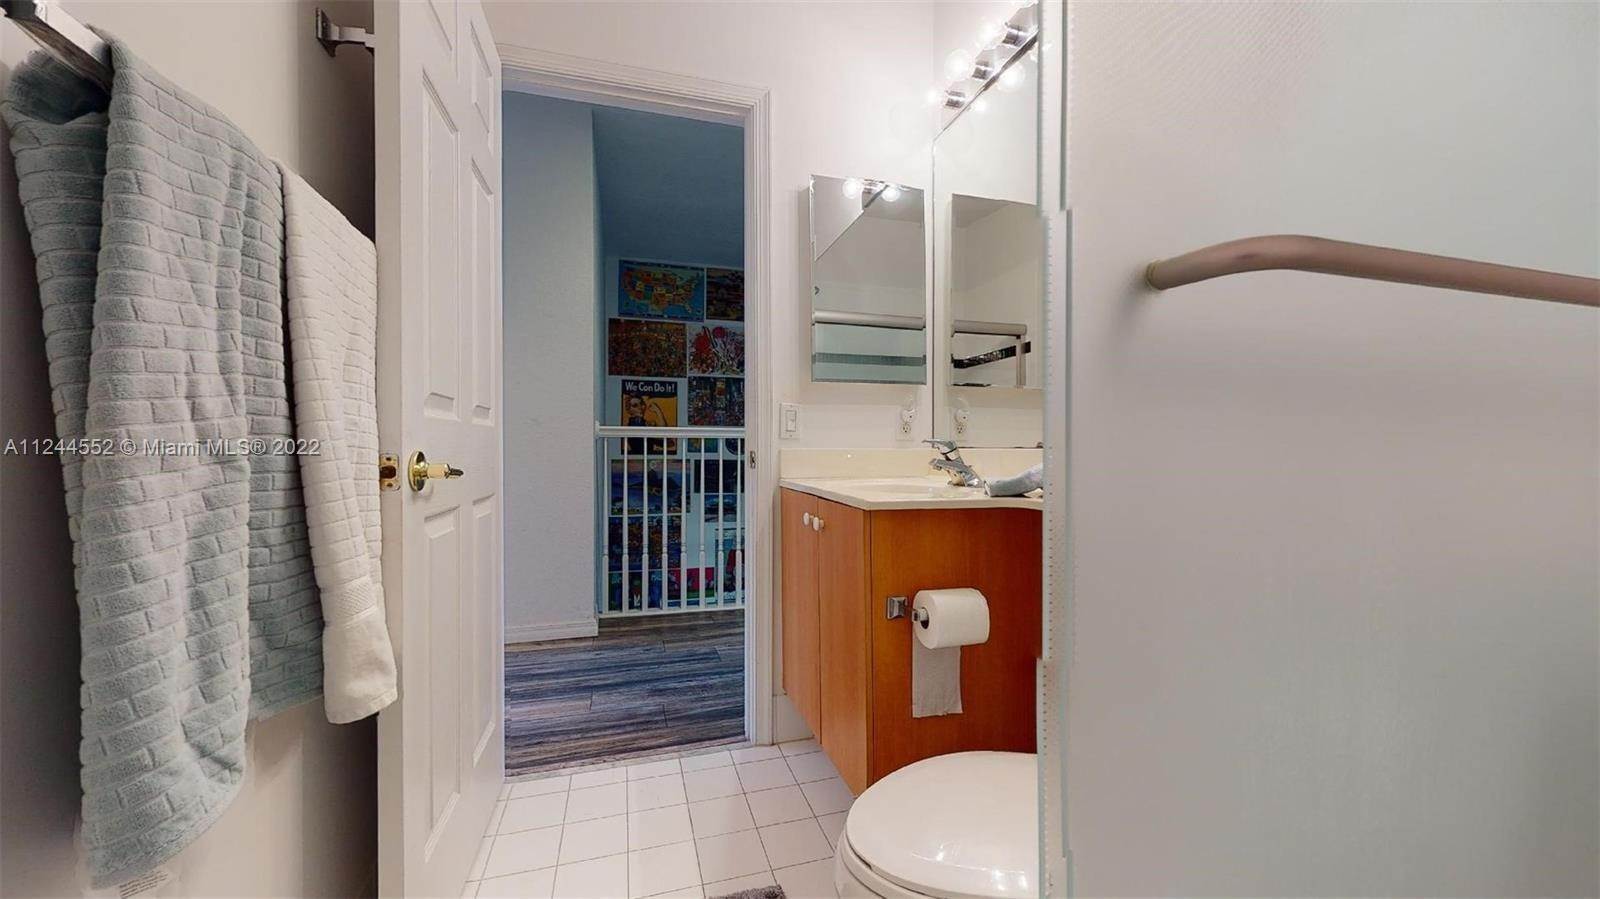 17. Townhouse for Sale at Aventura, FL 33180